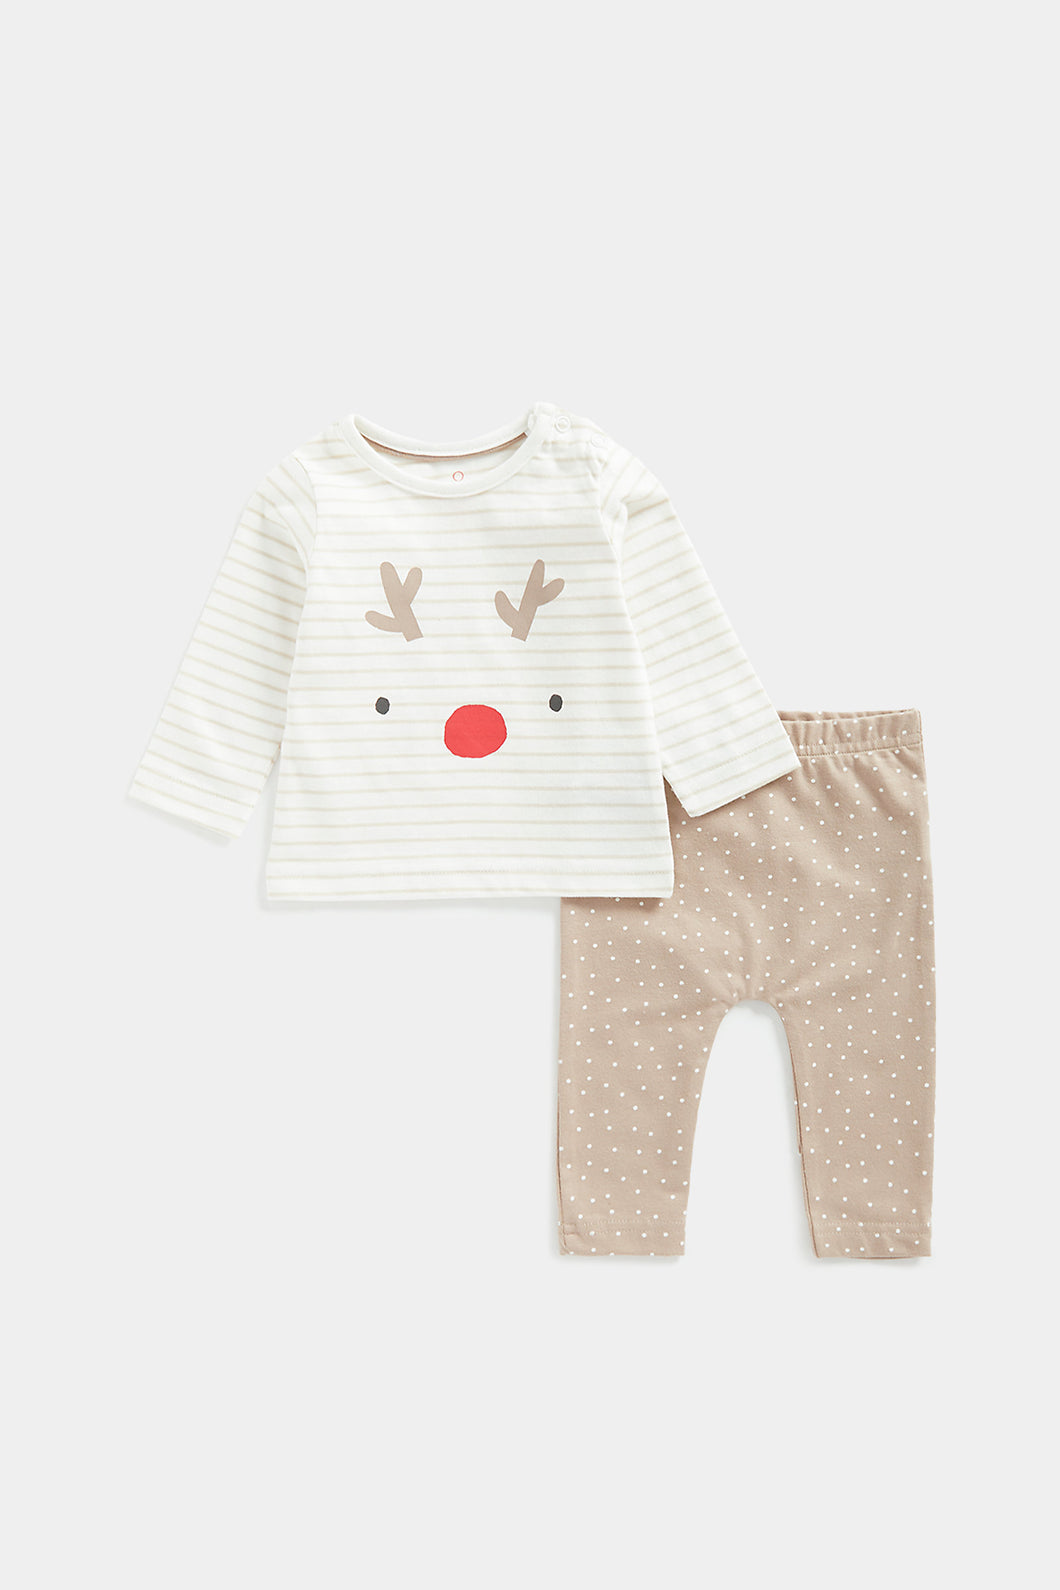 Mothercare Festive Top and Leggings Set